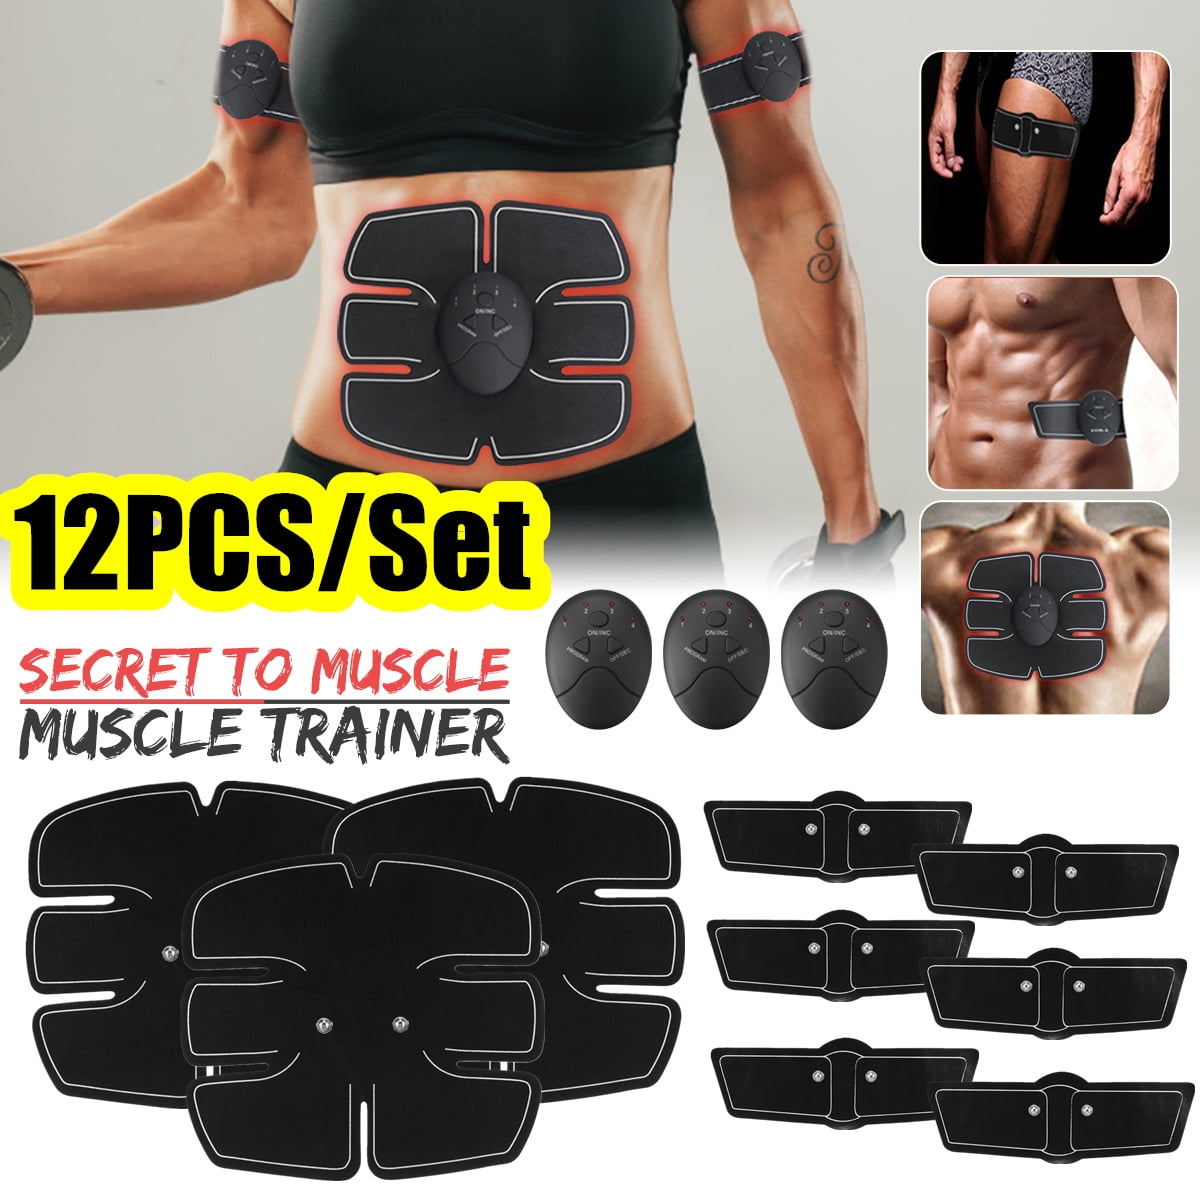 ABS Stimulator Body Training, Muscle Stimulation Abdominal Muscle Trainer Smart Body Building Fitness Ab Core Toners Work Out